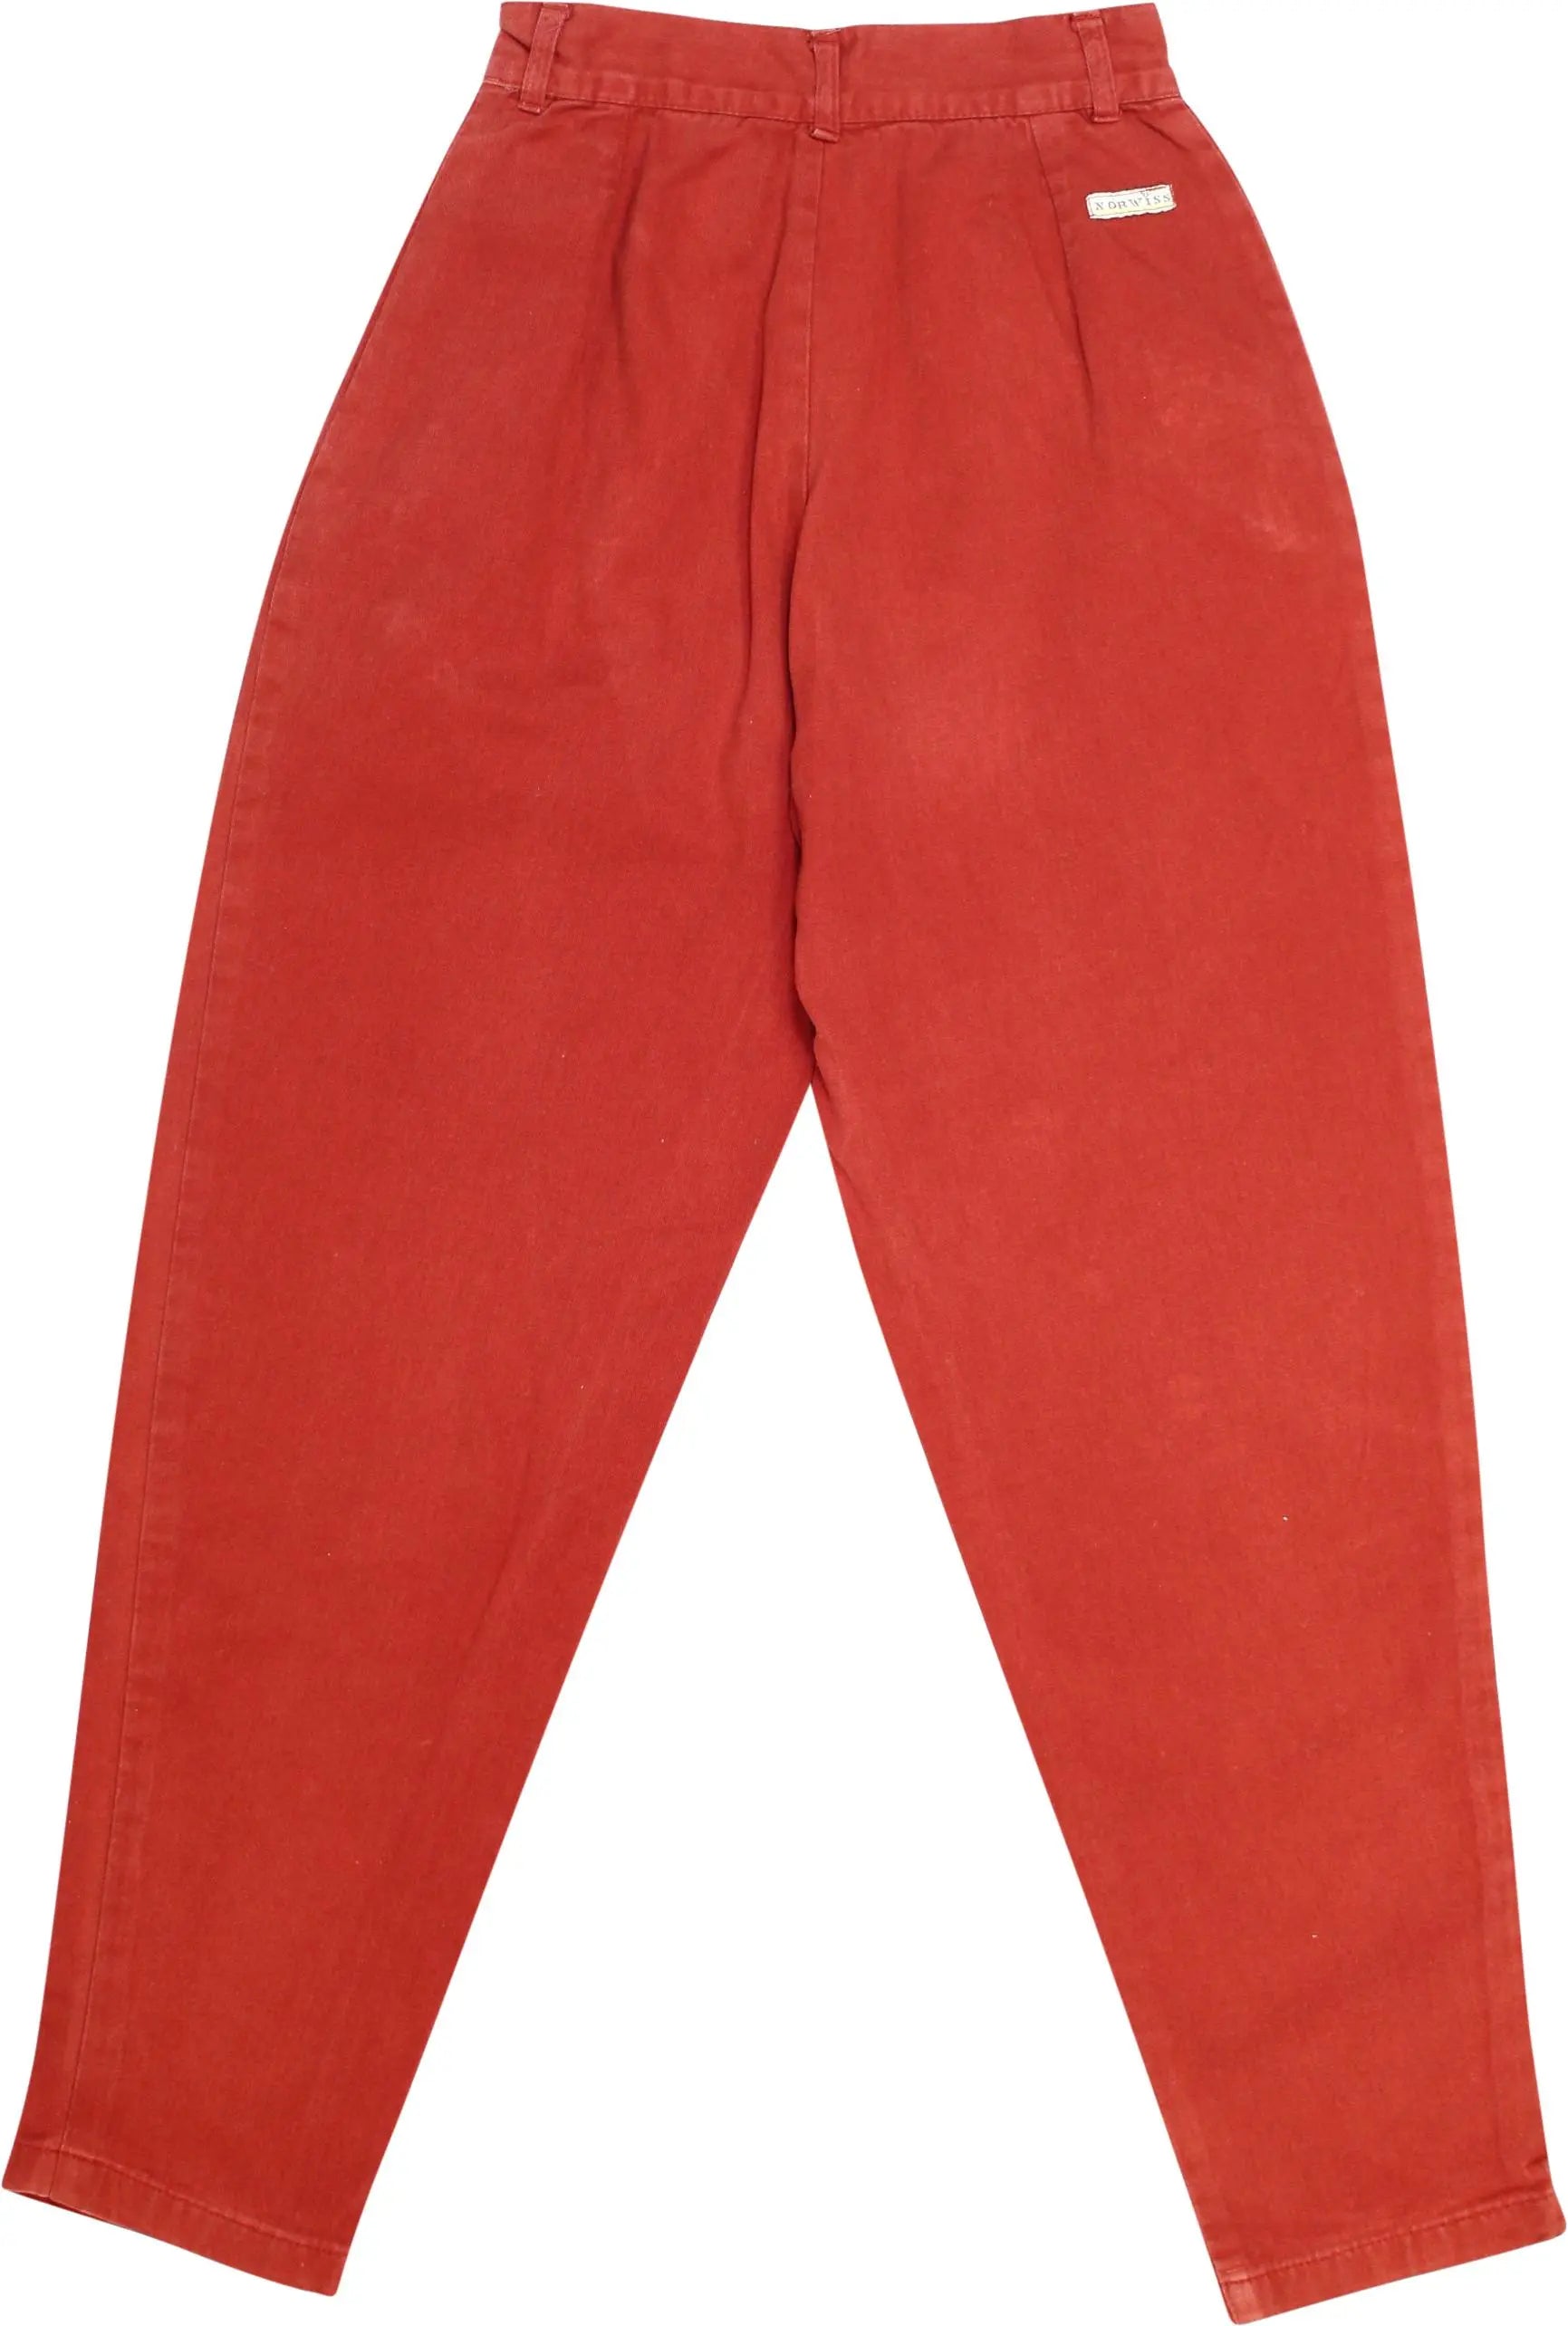 Norwiss - Red High Waisted Pants- ThriftTale.com - Vintage and second handclothing